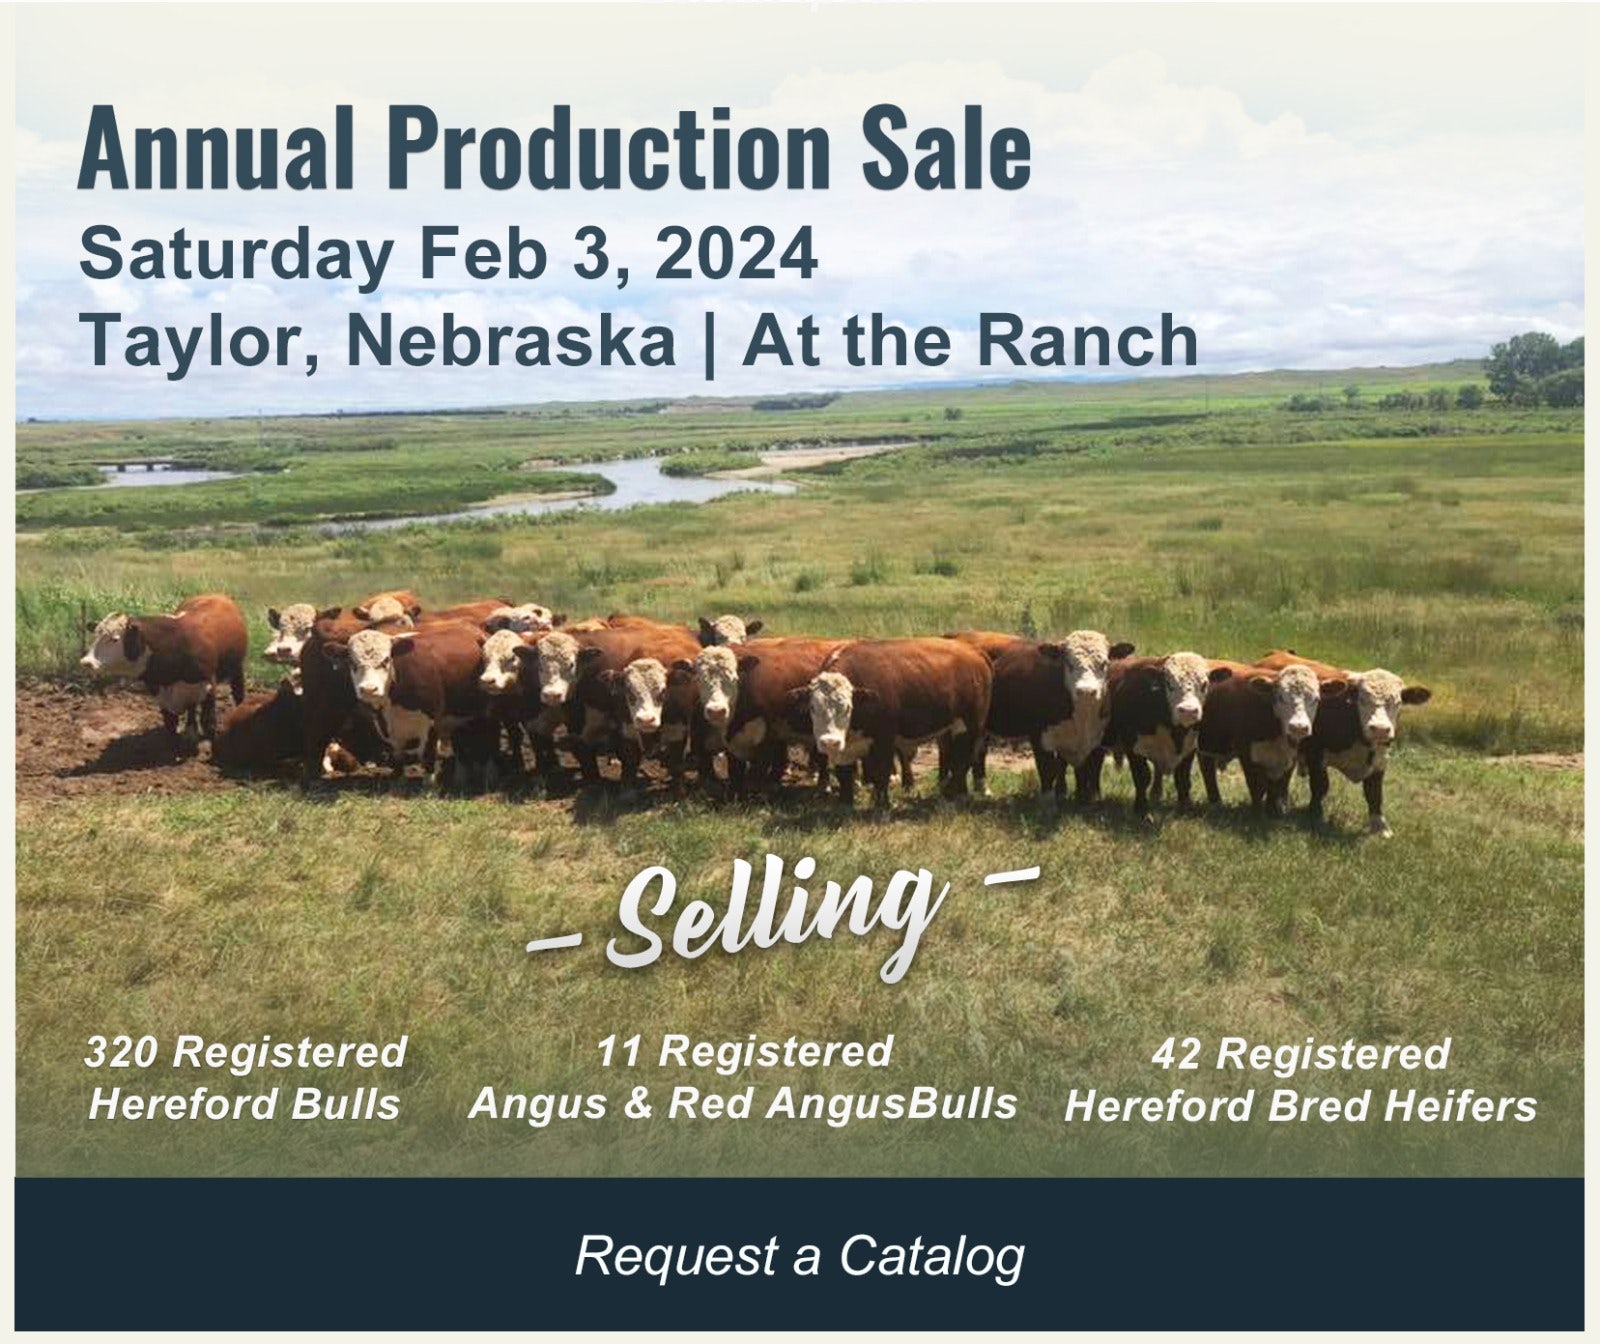 2023 Annual Production Sale